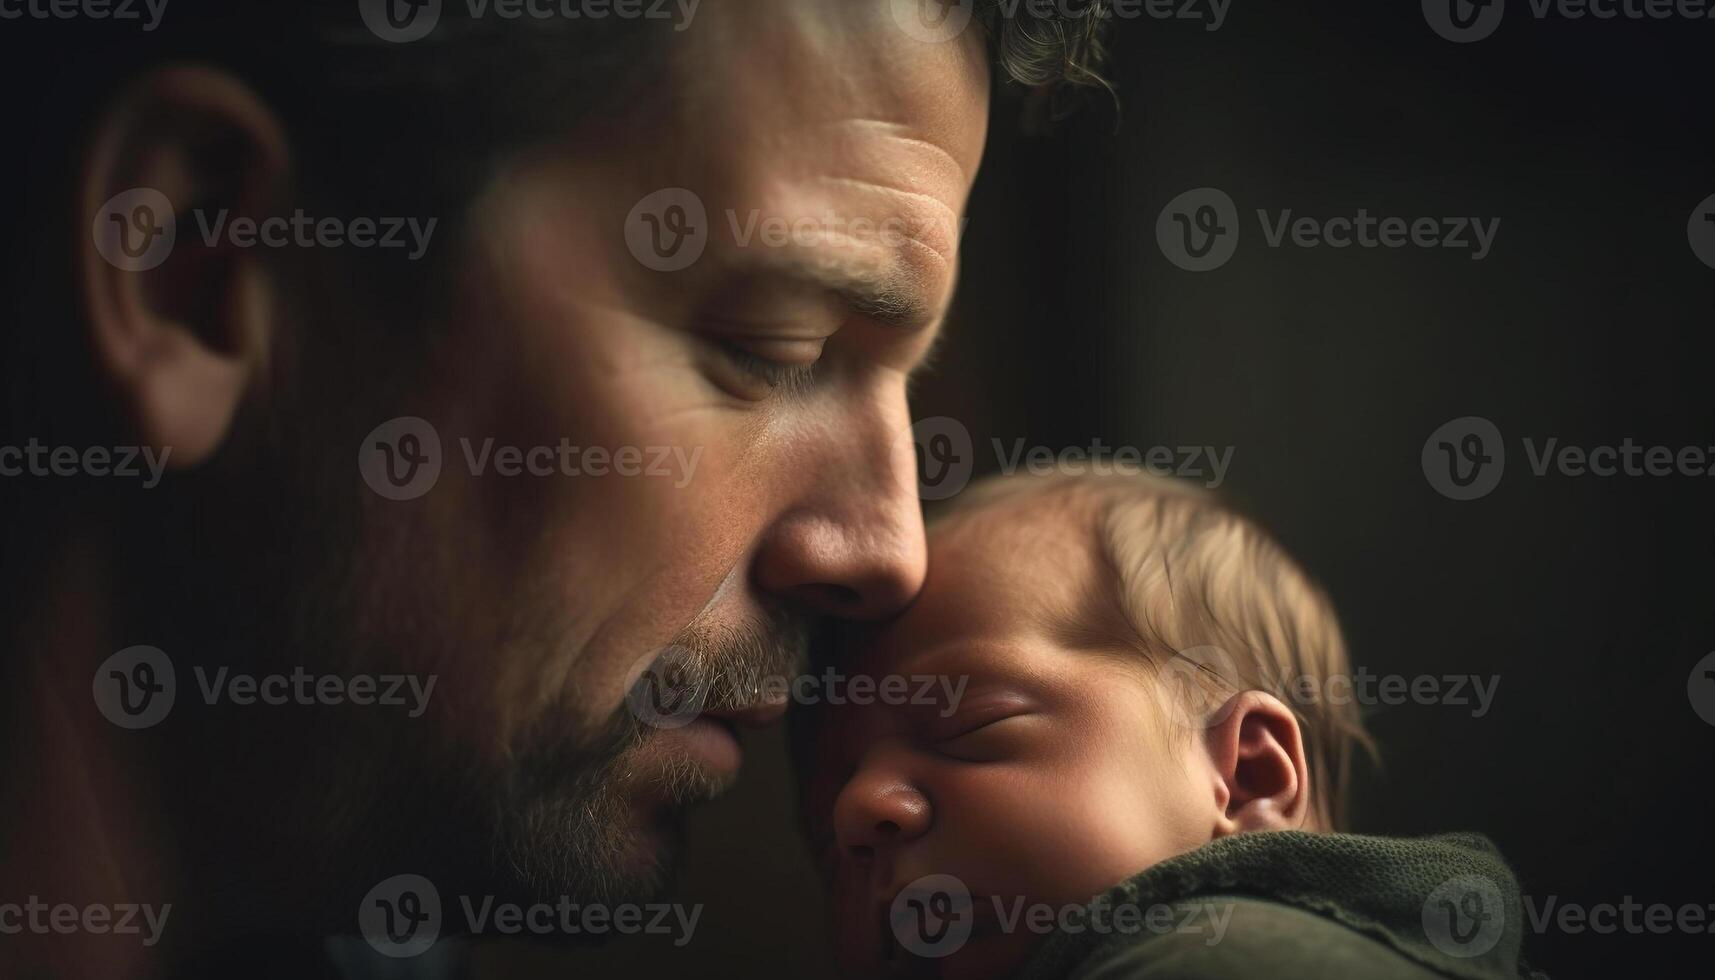 Love and bonding between father and son generated by AI photo